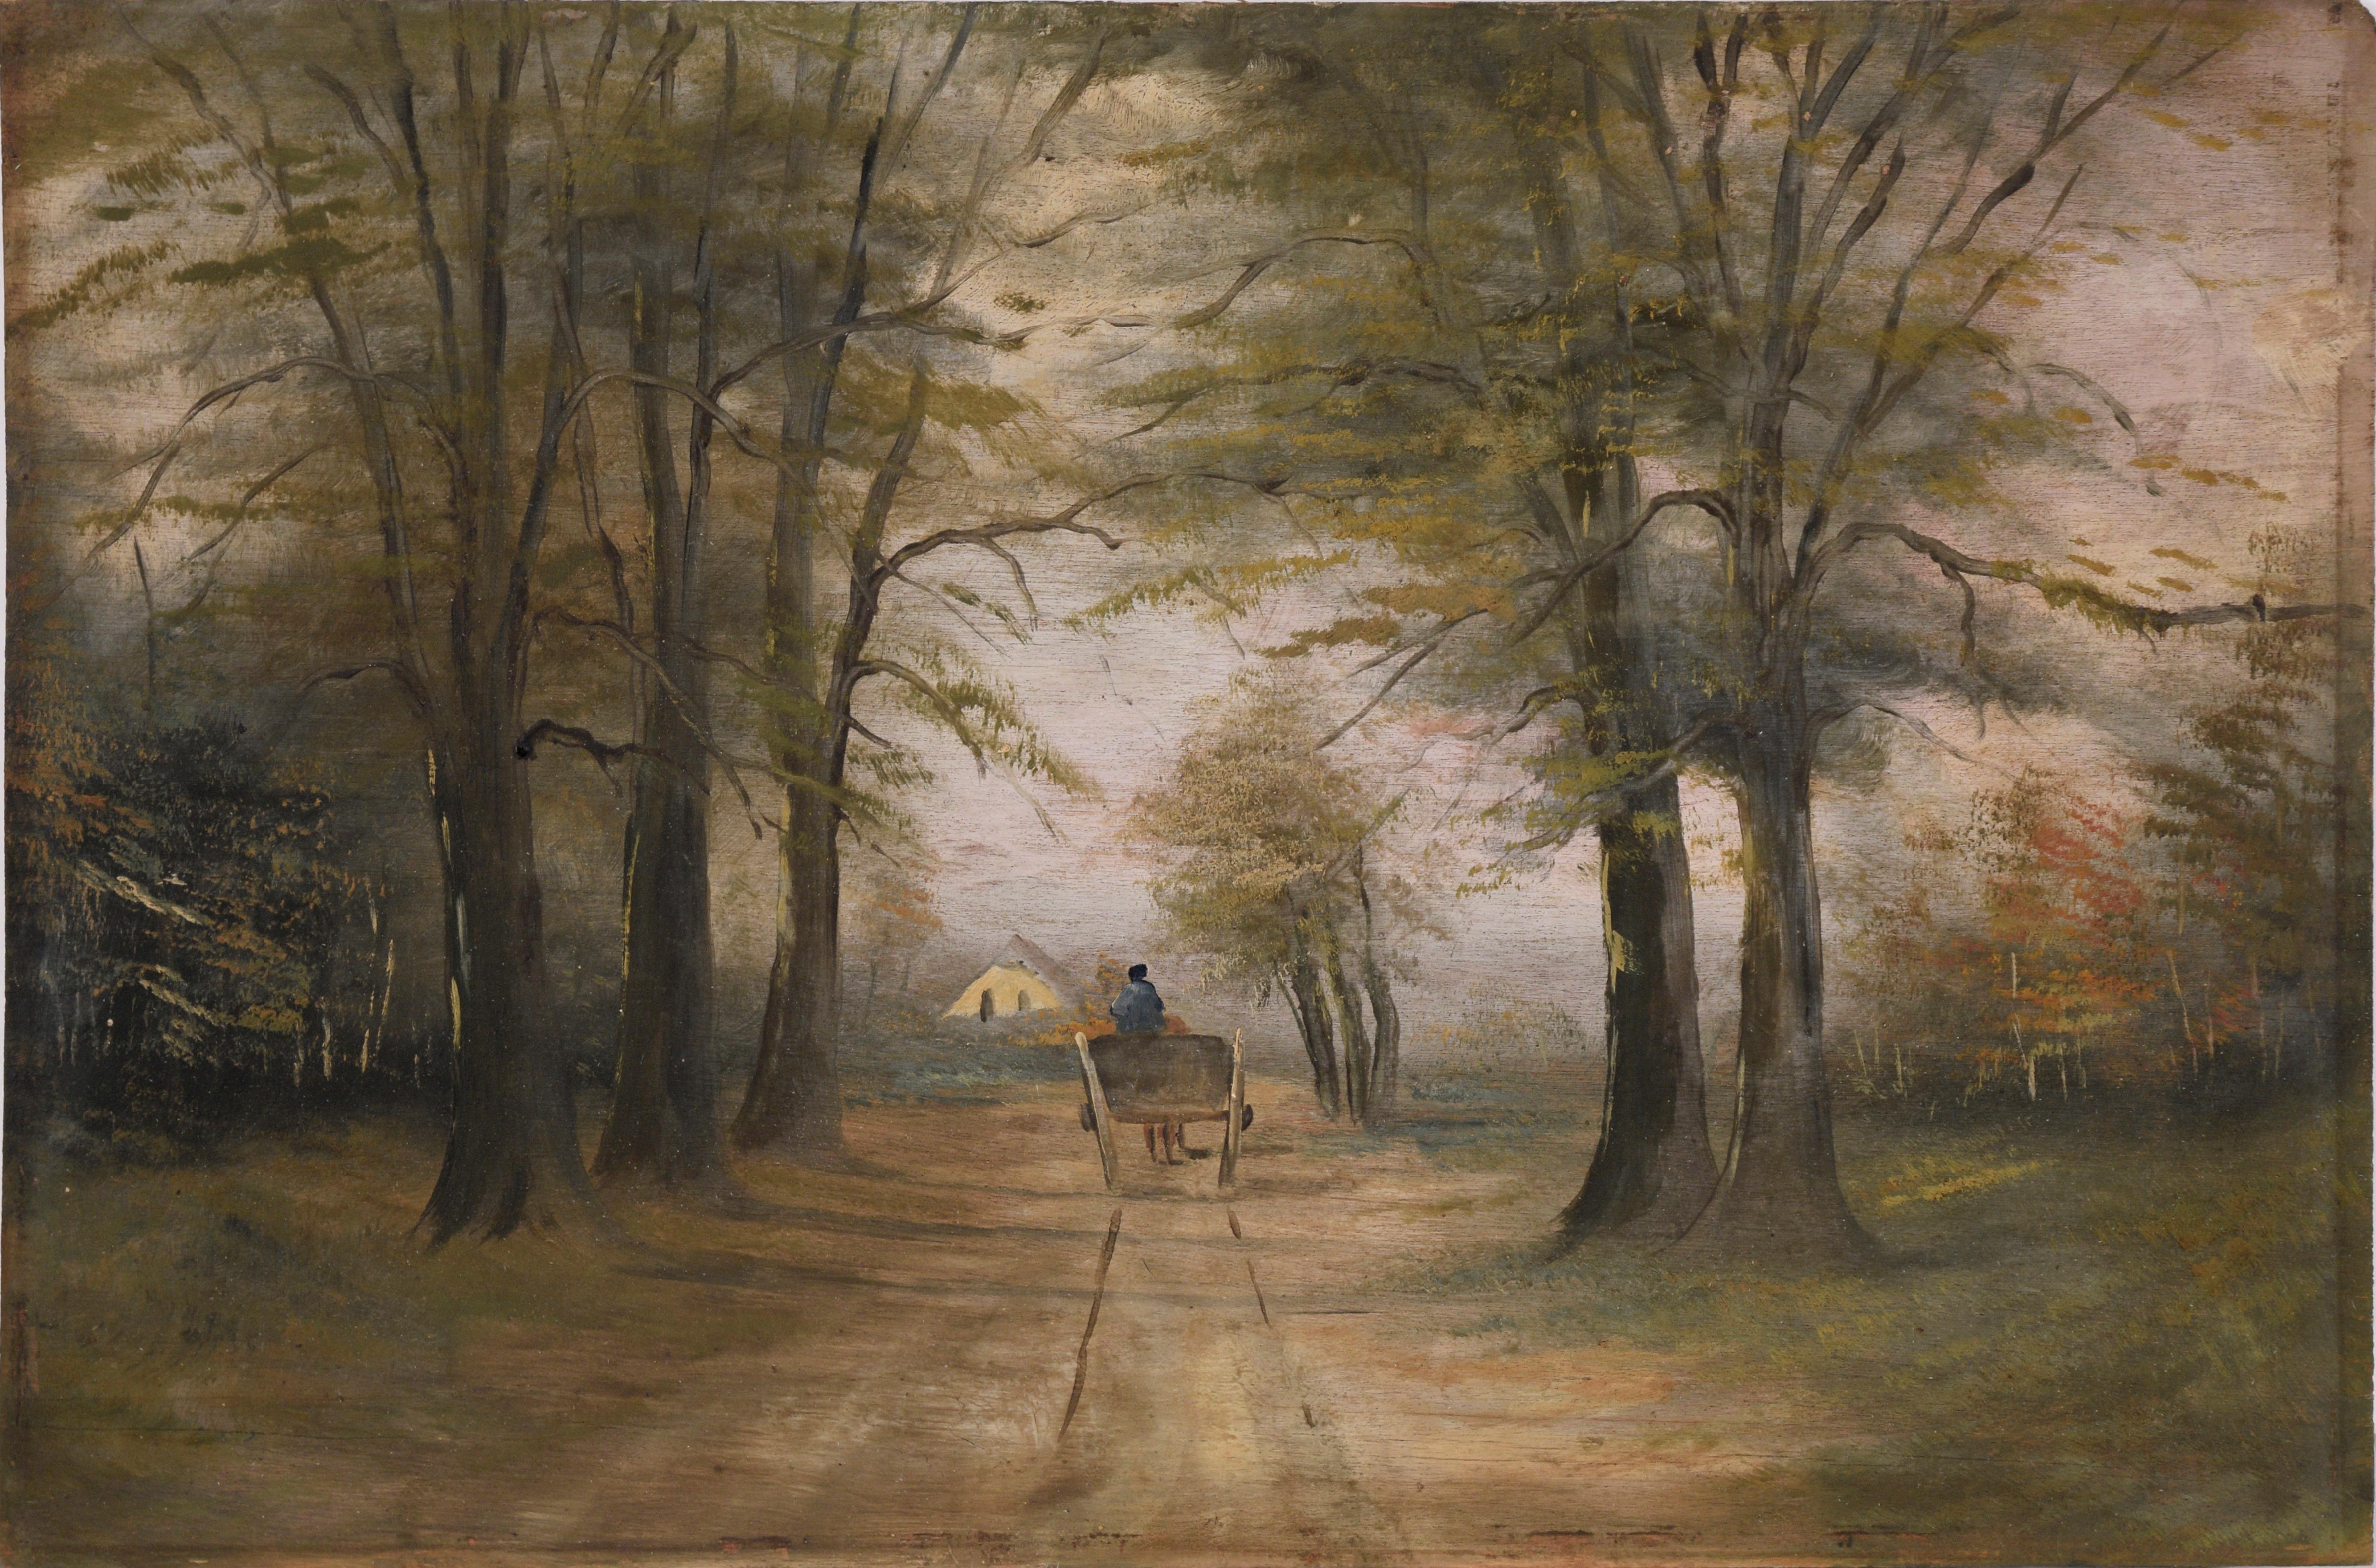 Unknown Figurative Painting - Horse Drawn Carriage in the Country Woods - Landscape in Oil on Wood Panel